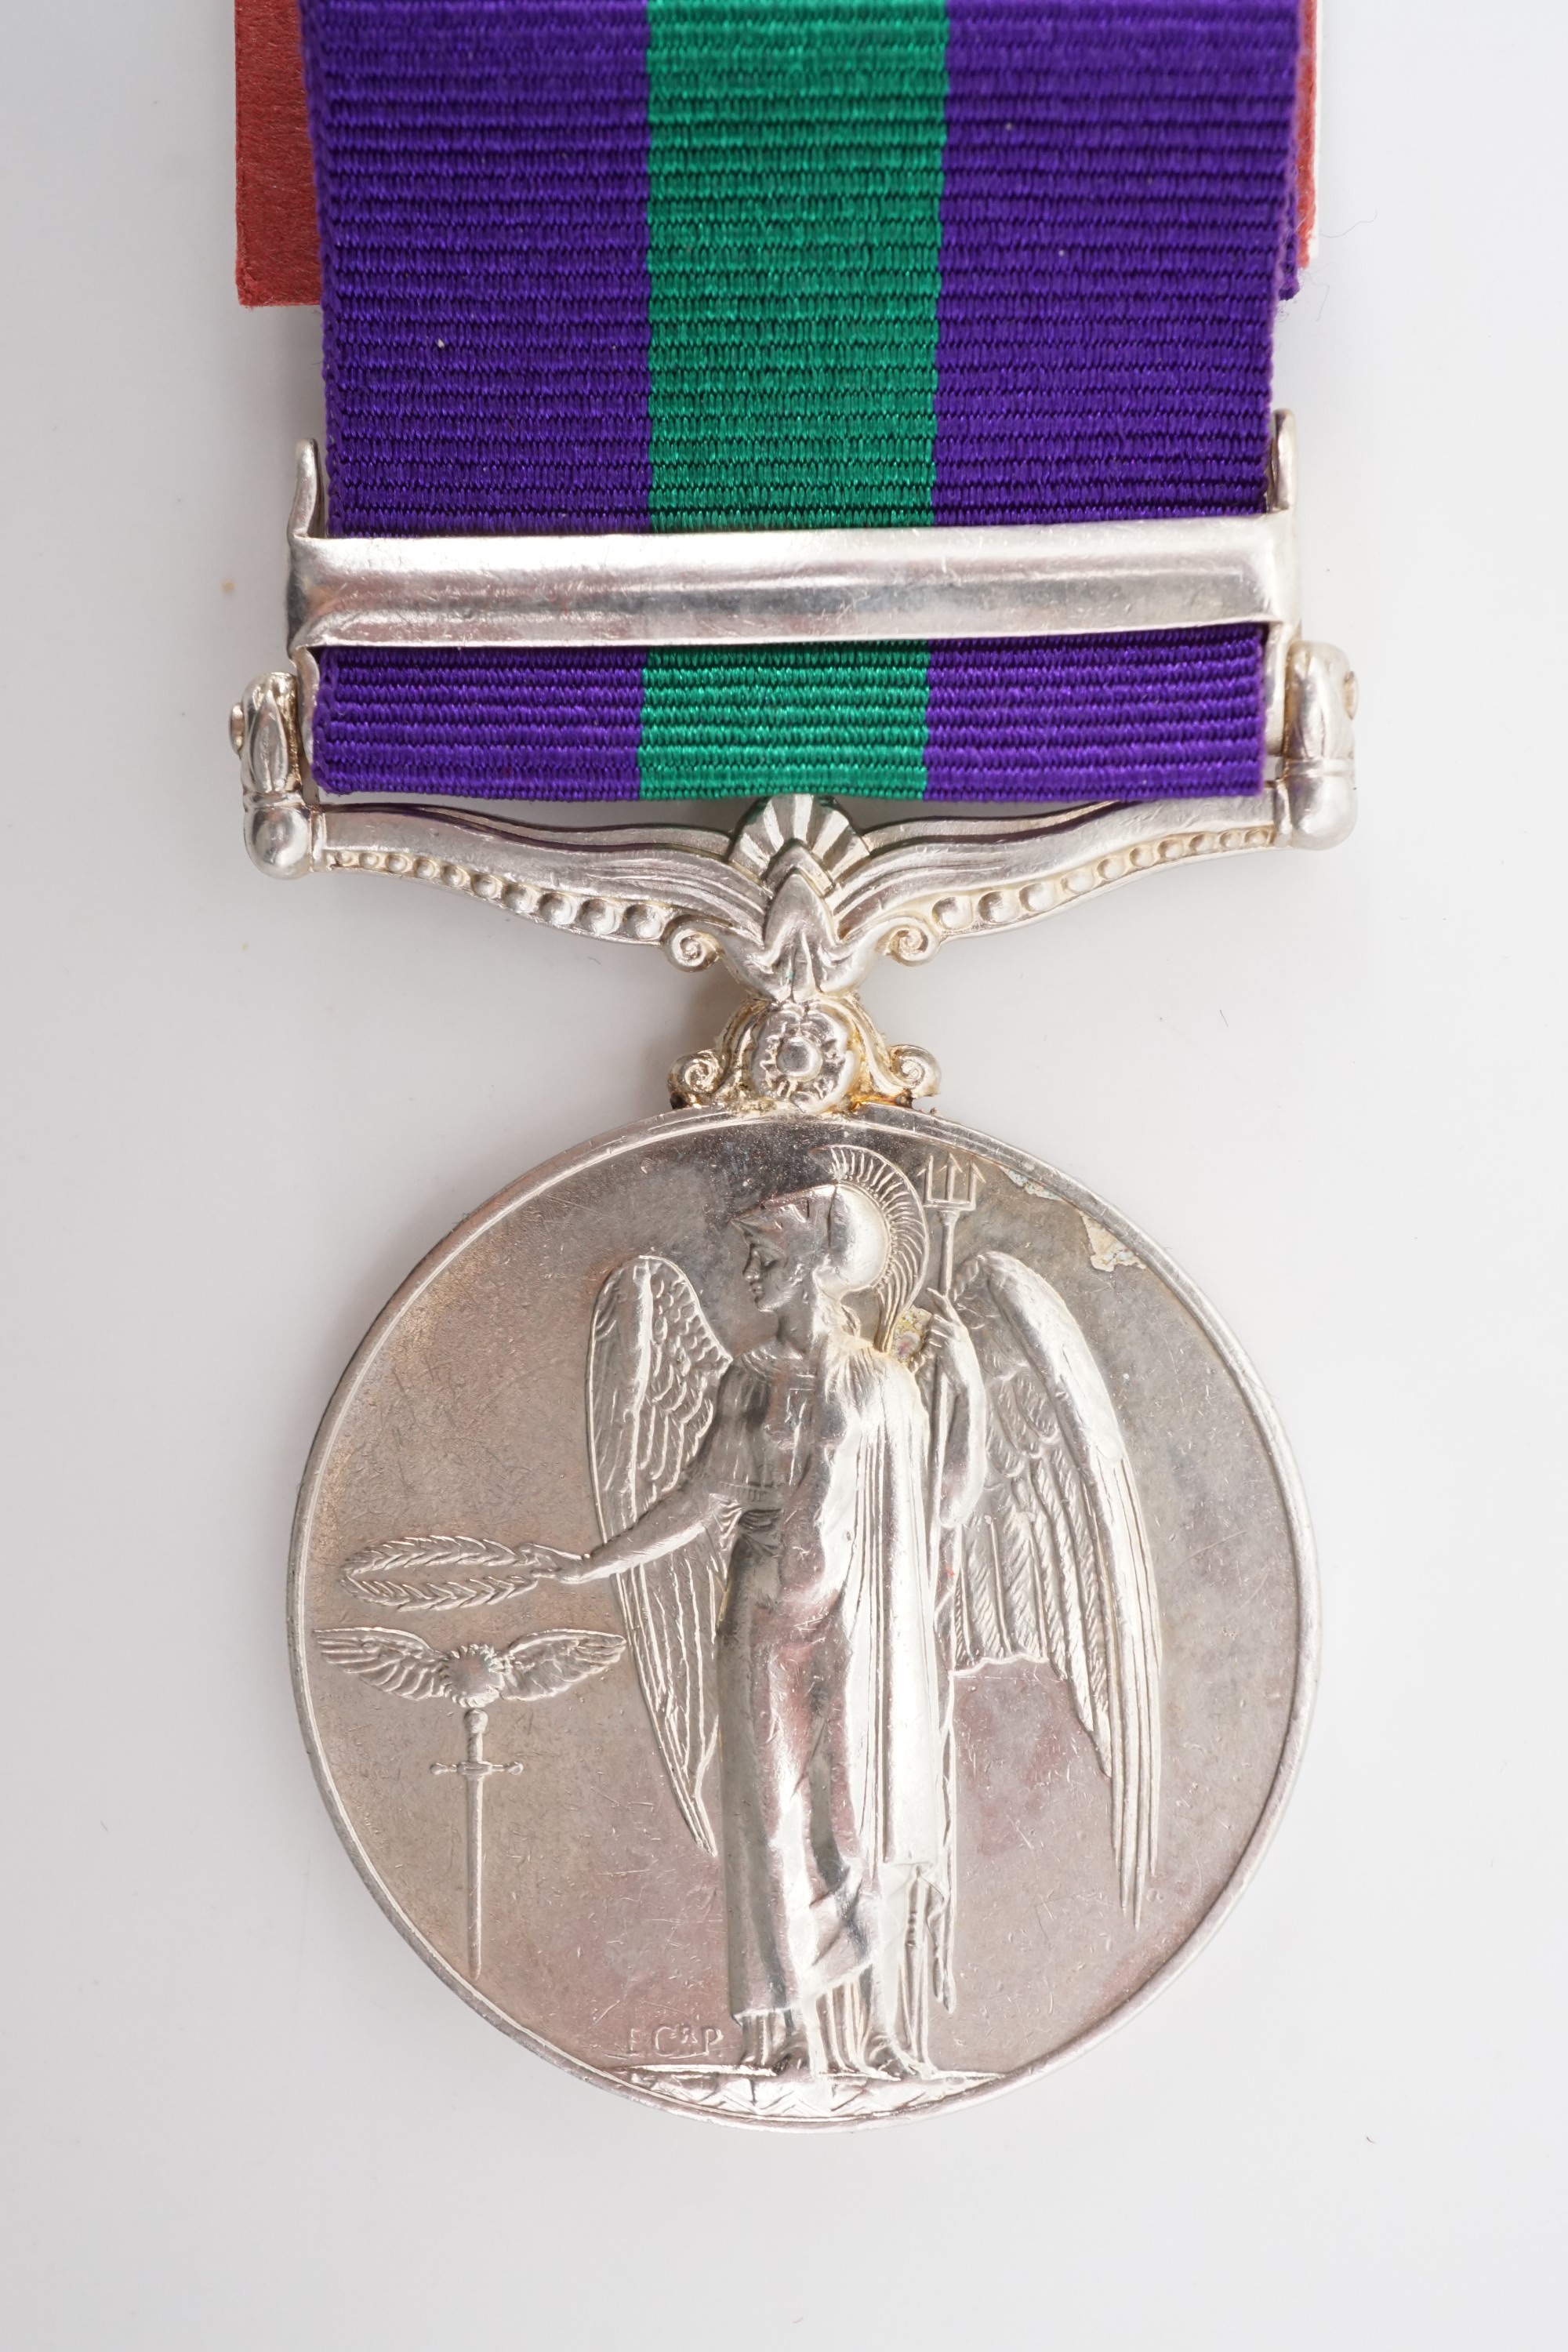 A George VI General Service Medal with Malaya clasp to 14464659 Pte A Nixon, ACC - Image 3 of 4